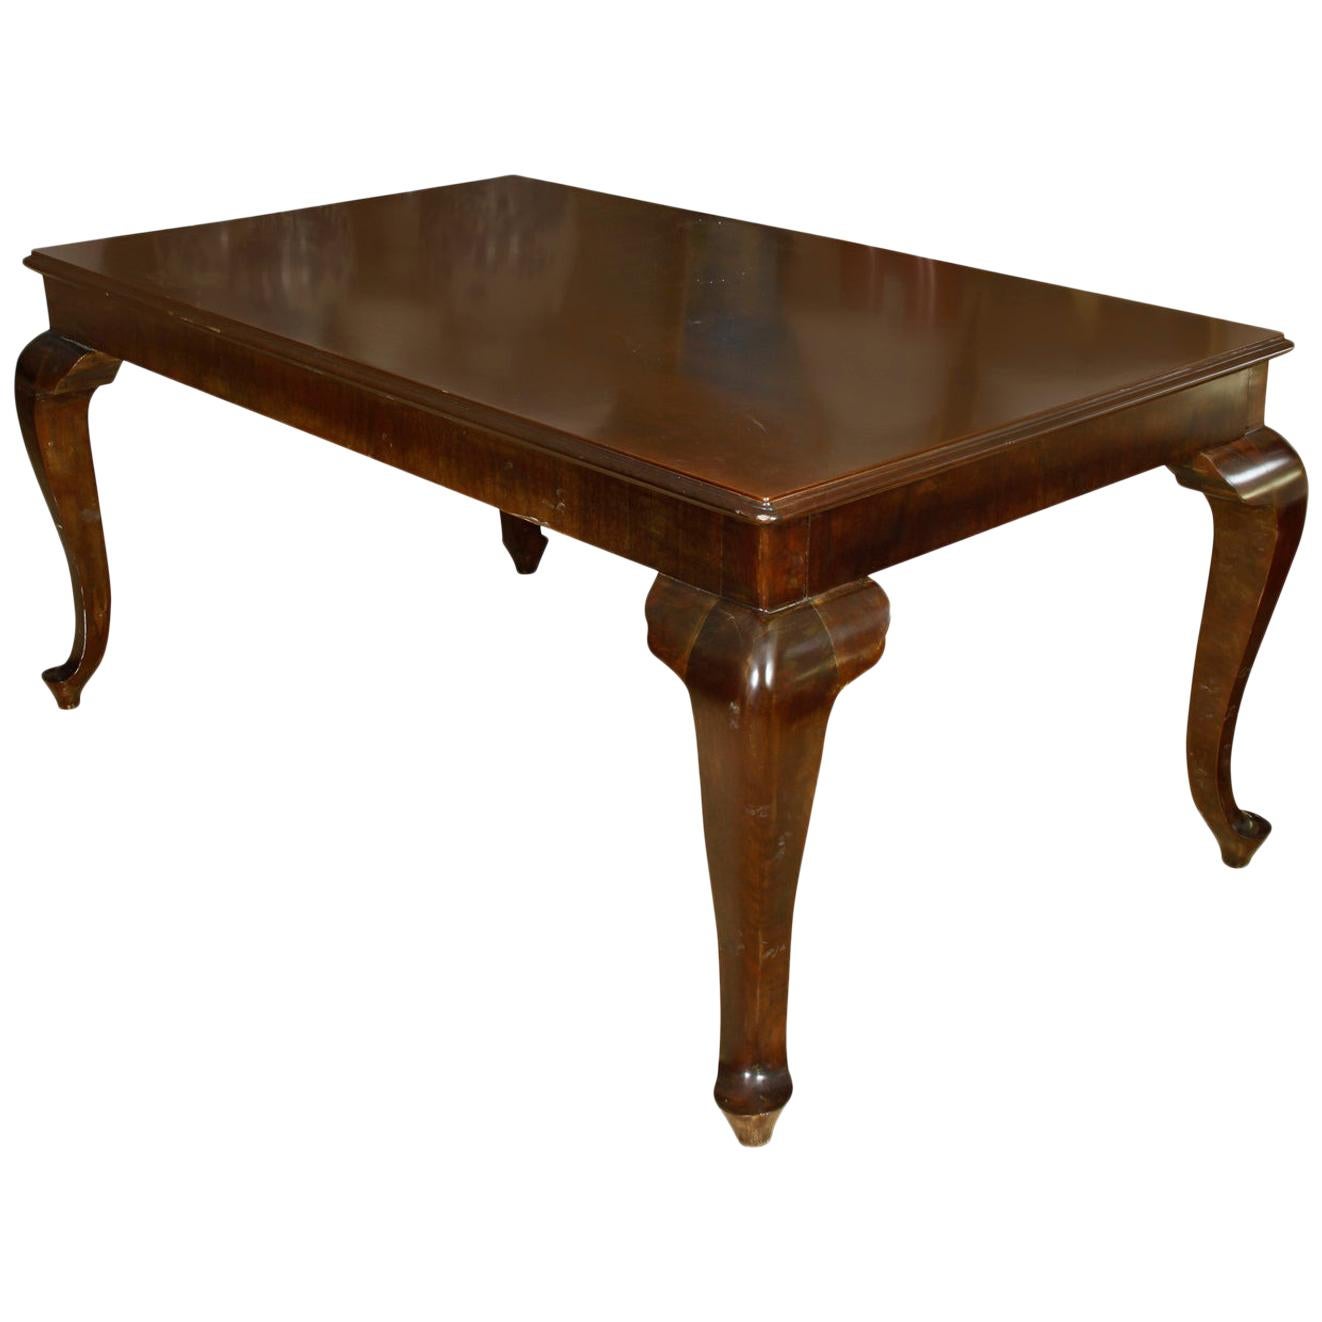 Mahogany Dining Table with Cabriole Legs